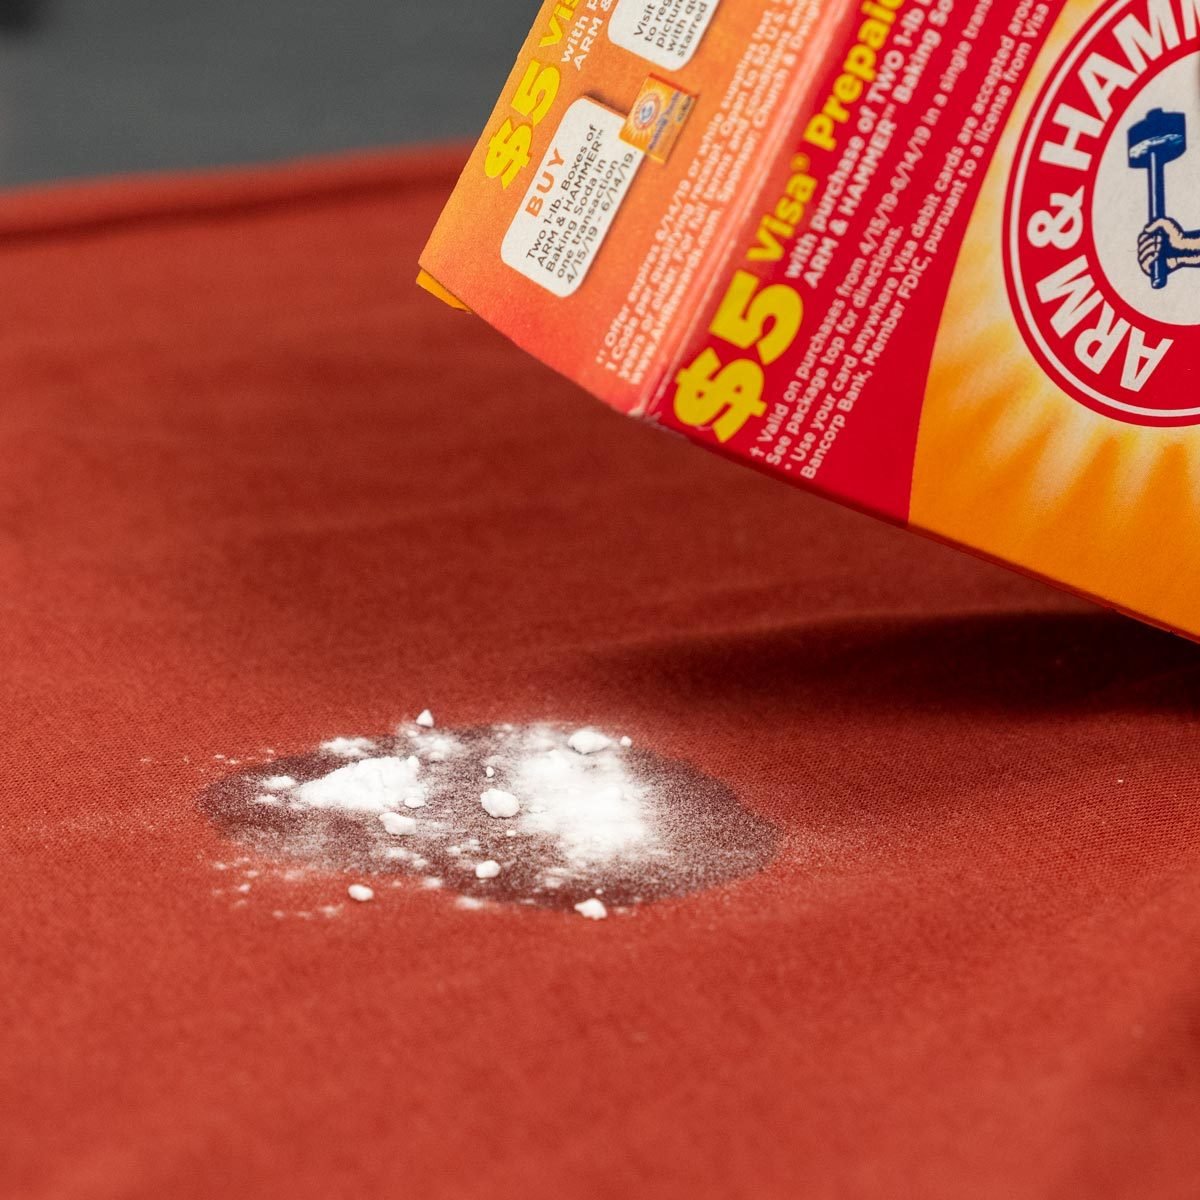 How To Use Baking Soda For Whitening Clothes: Amazingly Effective Tips